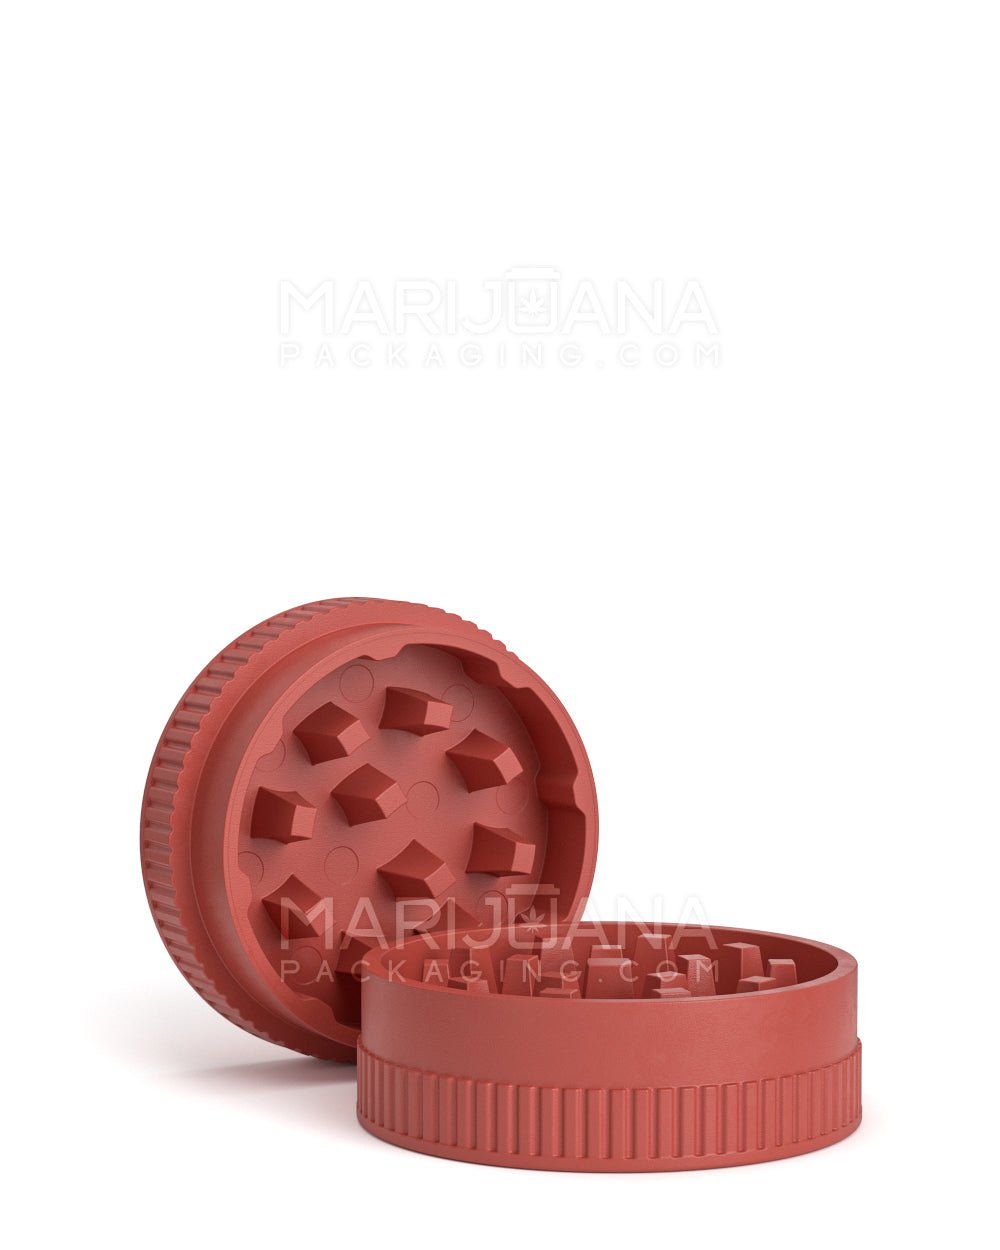 Biodegradable Thick Wall Red Grinder | 2 Piece - 55mm - 12 Count - 5